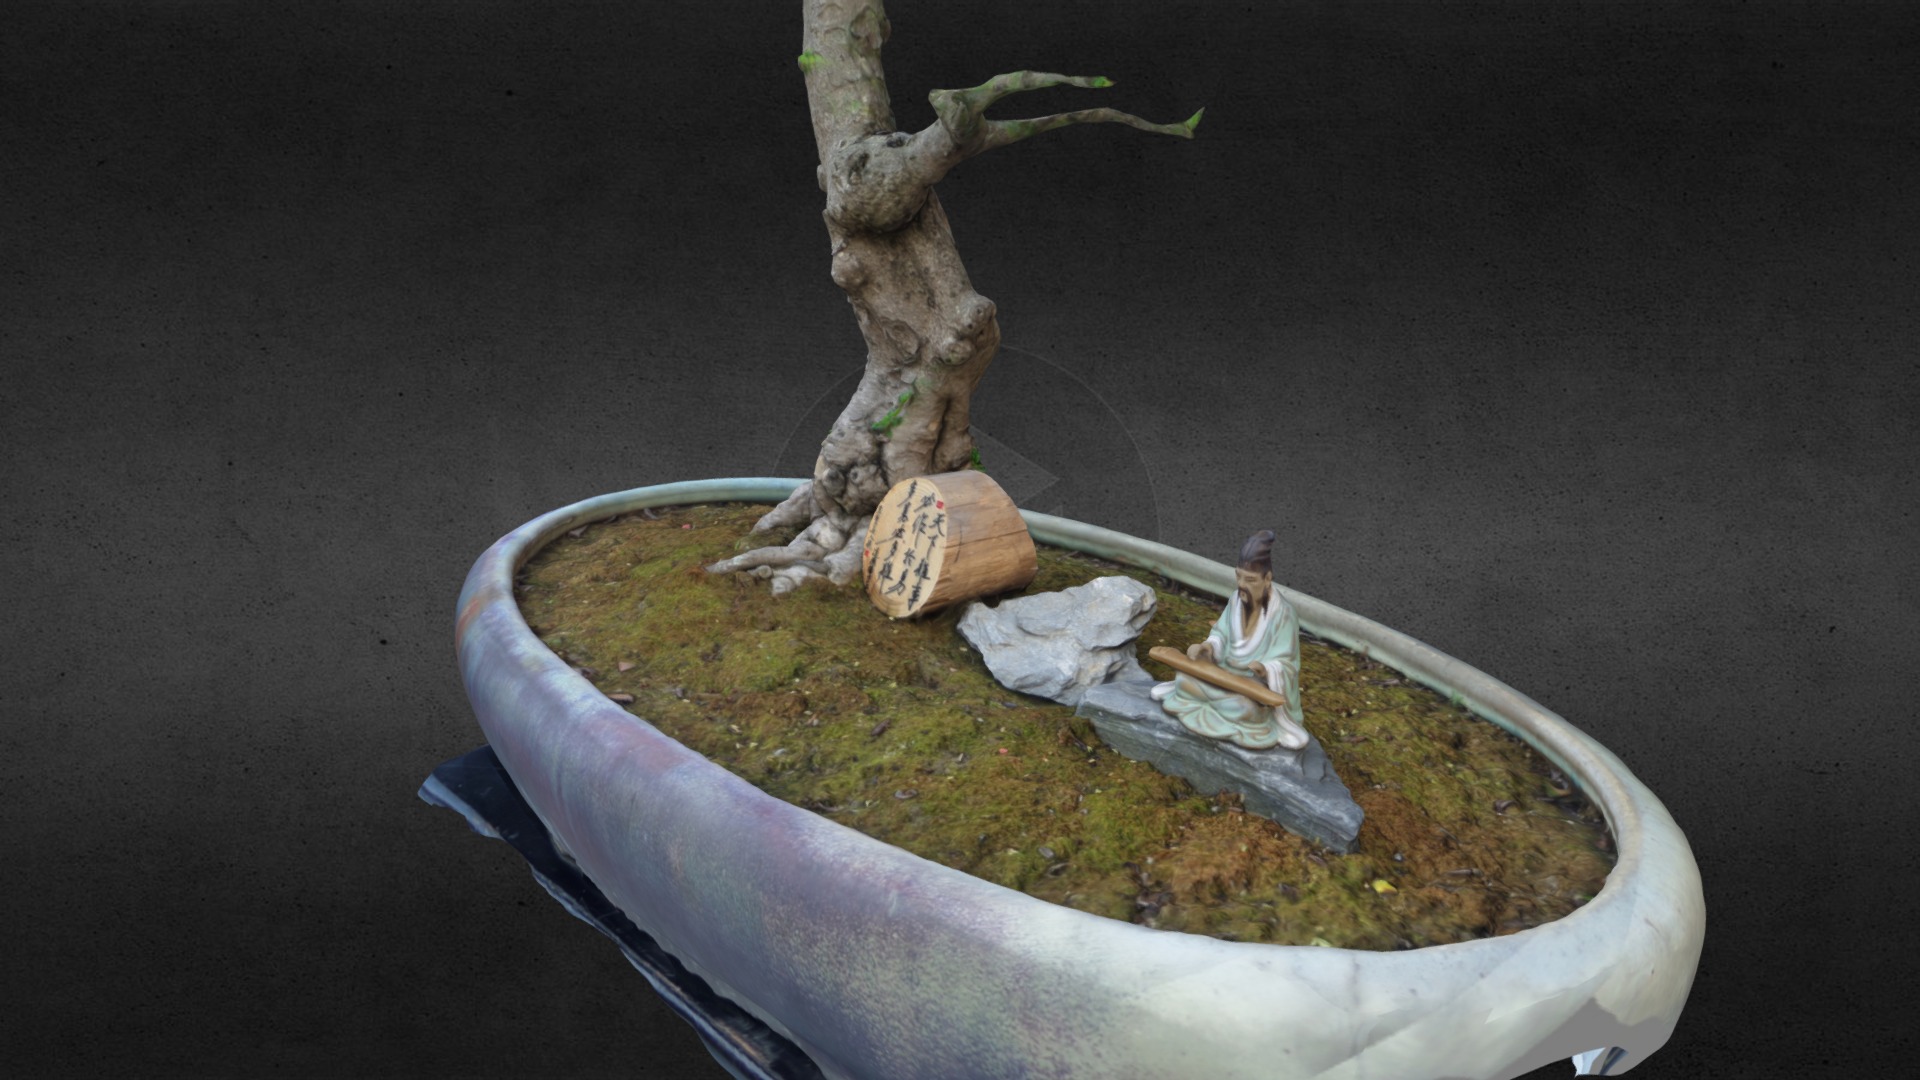 3D model Bonsai - This is a 3D model of the Bonsai. The 3D model is about a tree stump with a statue of a person sitting on it.